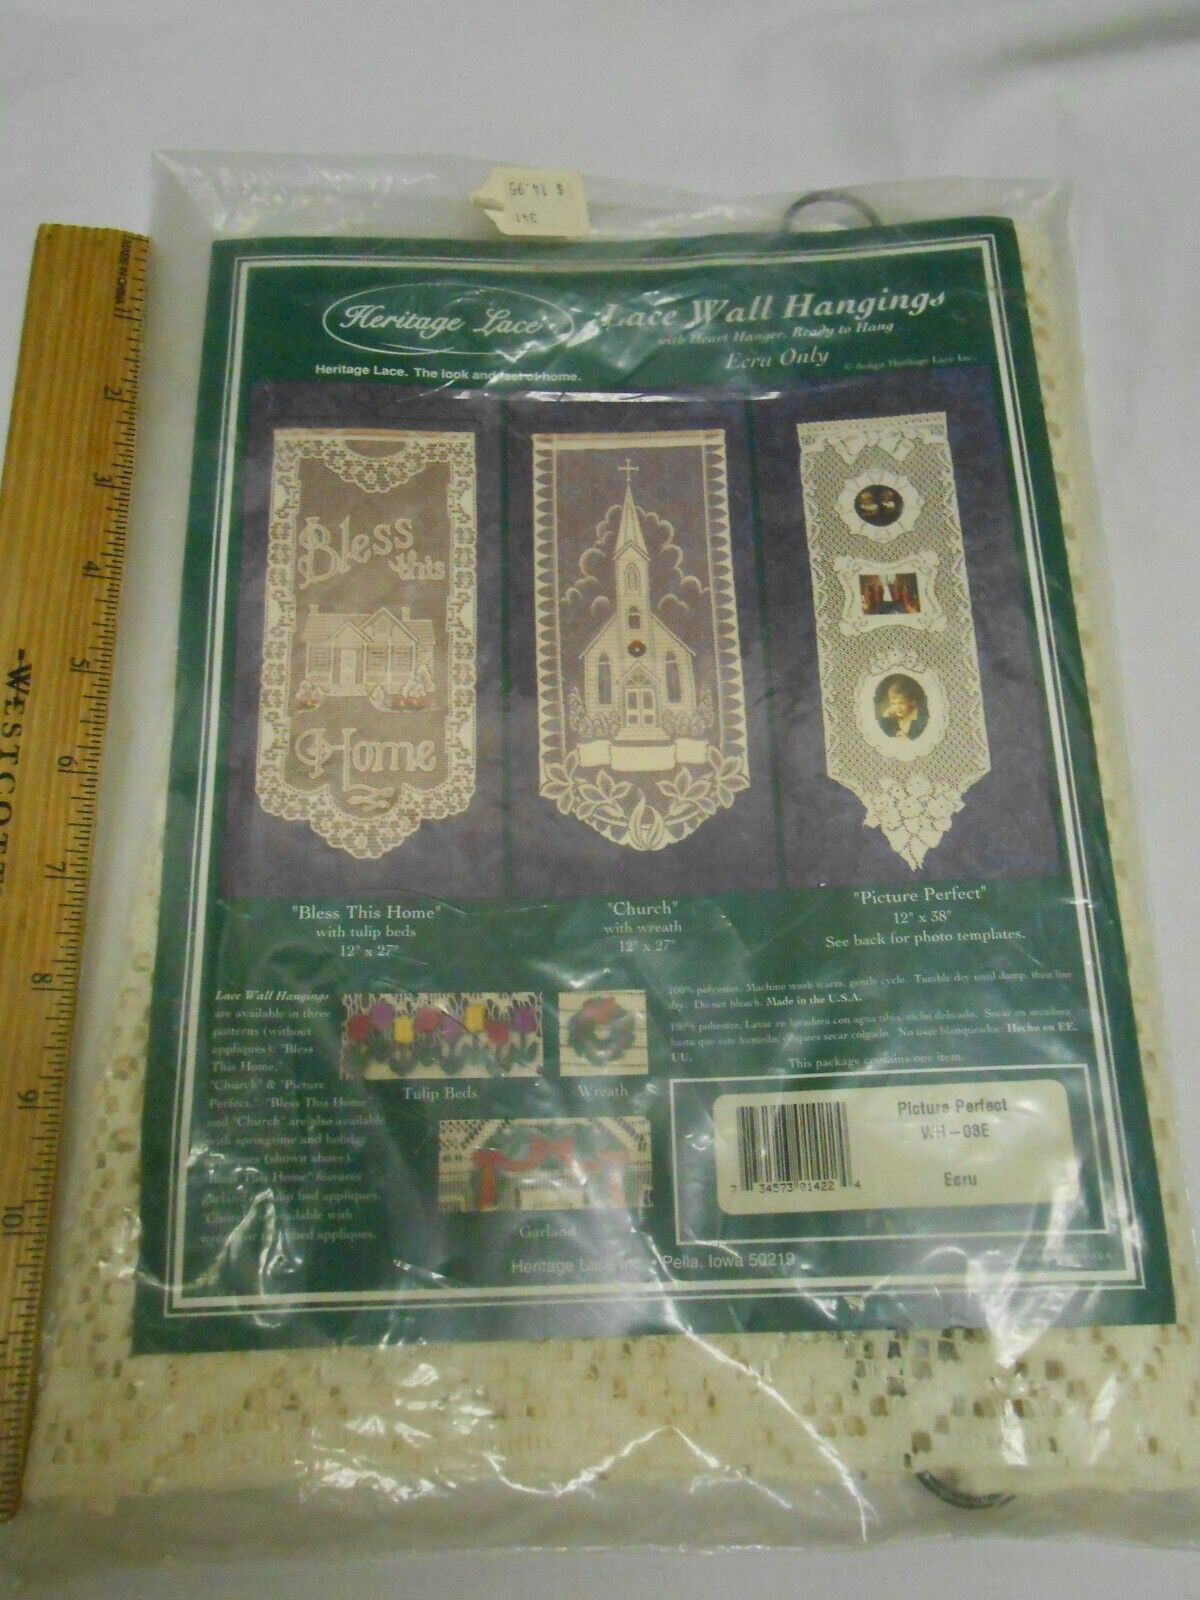 Vintage Heritage Lace Sealed Wall Hanging Picture Perfect 12X38 inches NEW ecru - $6.72